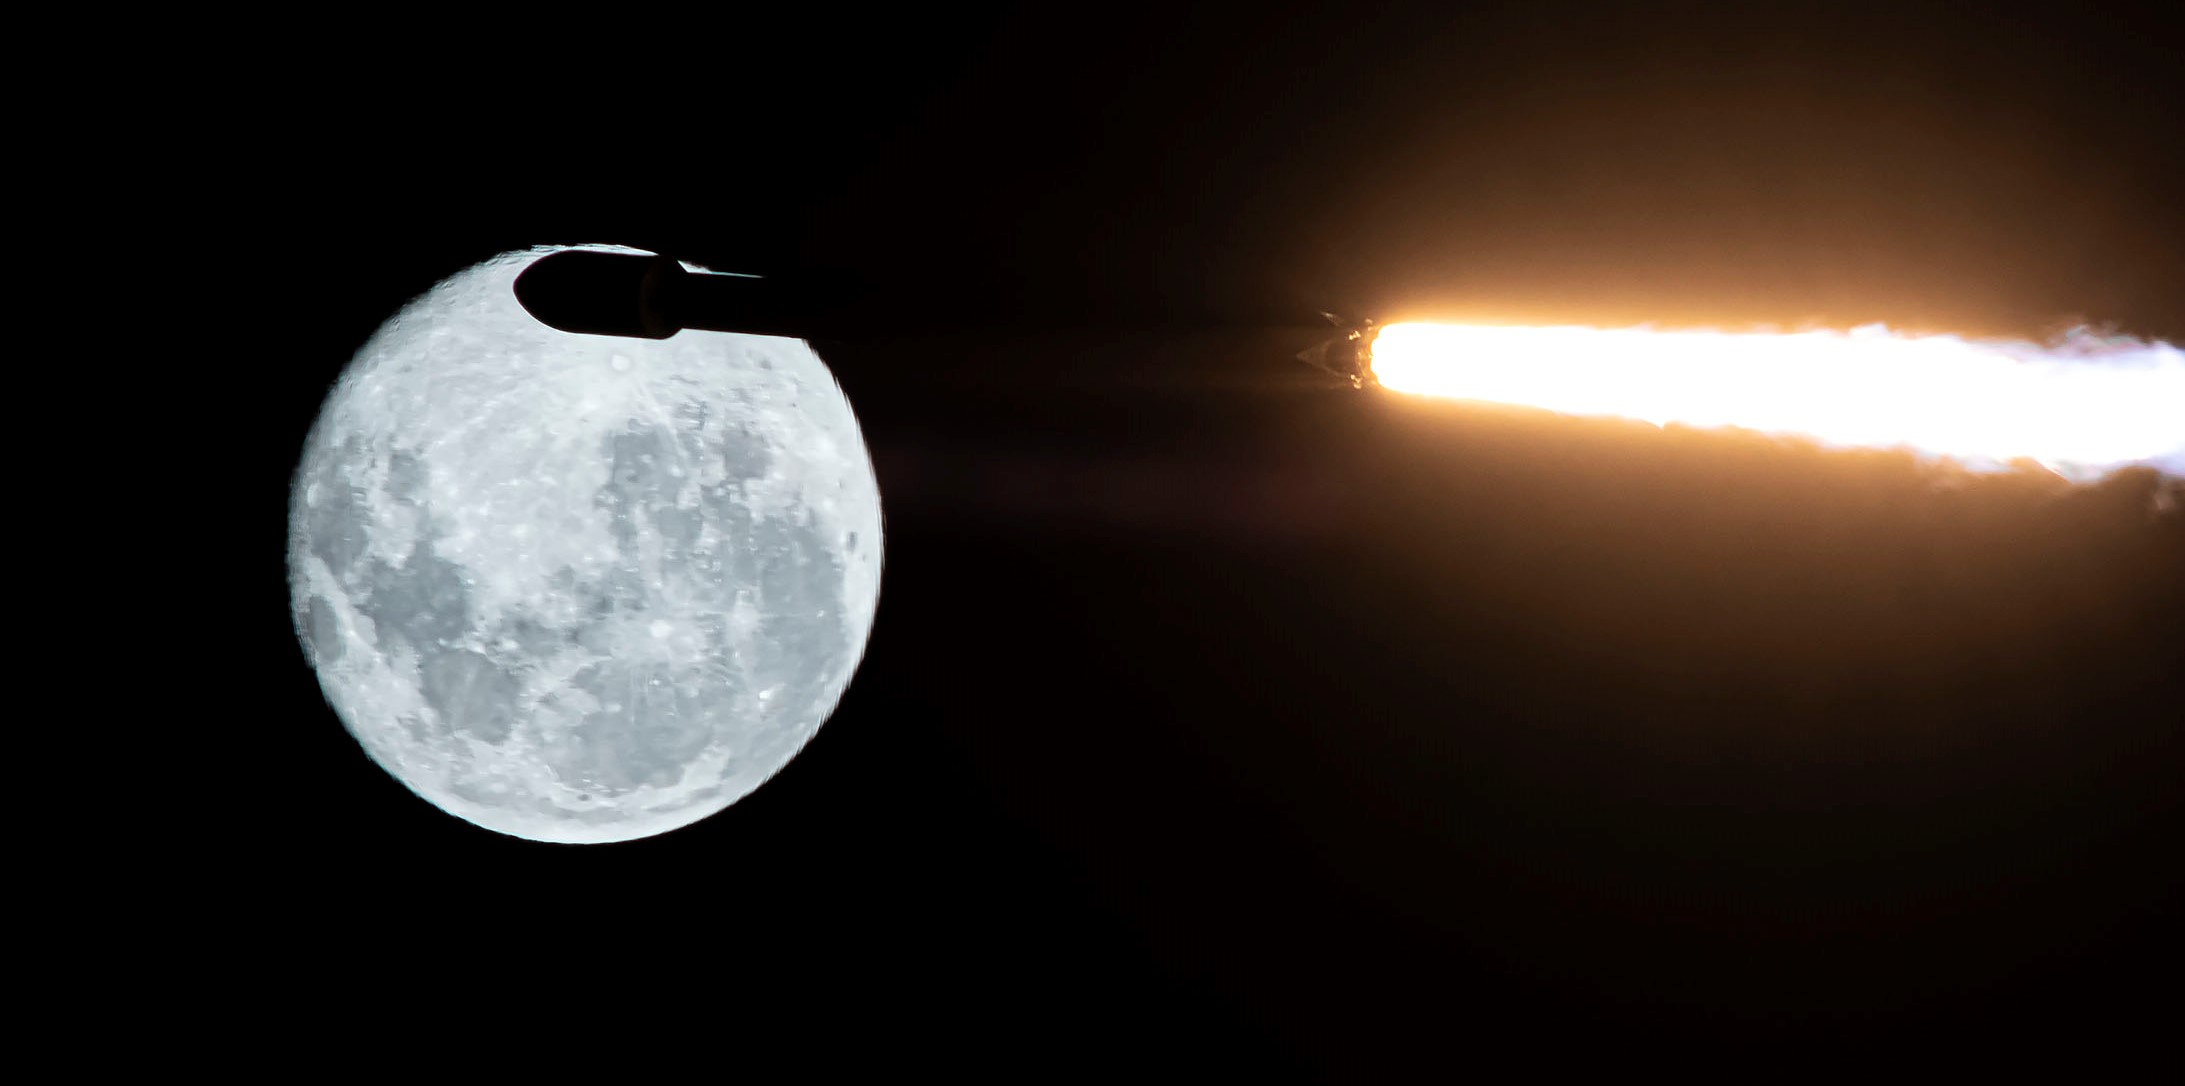 Starlink 4-6 F9 B1060 39A 011822 (SpaceX) launch + moon 1 crop